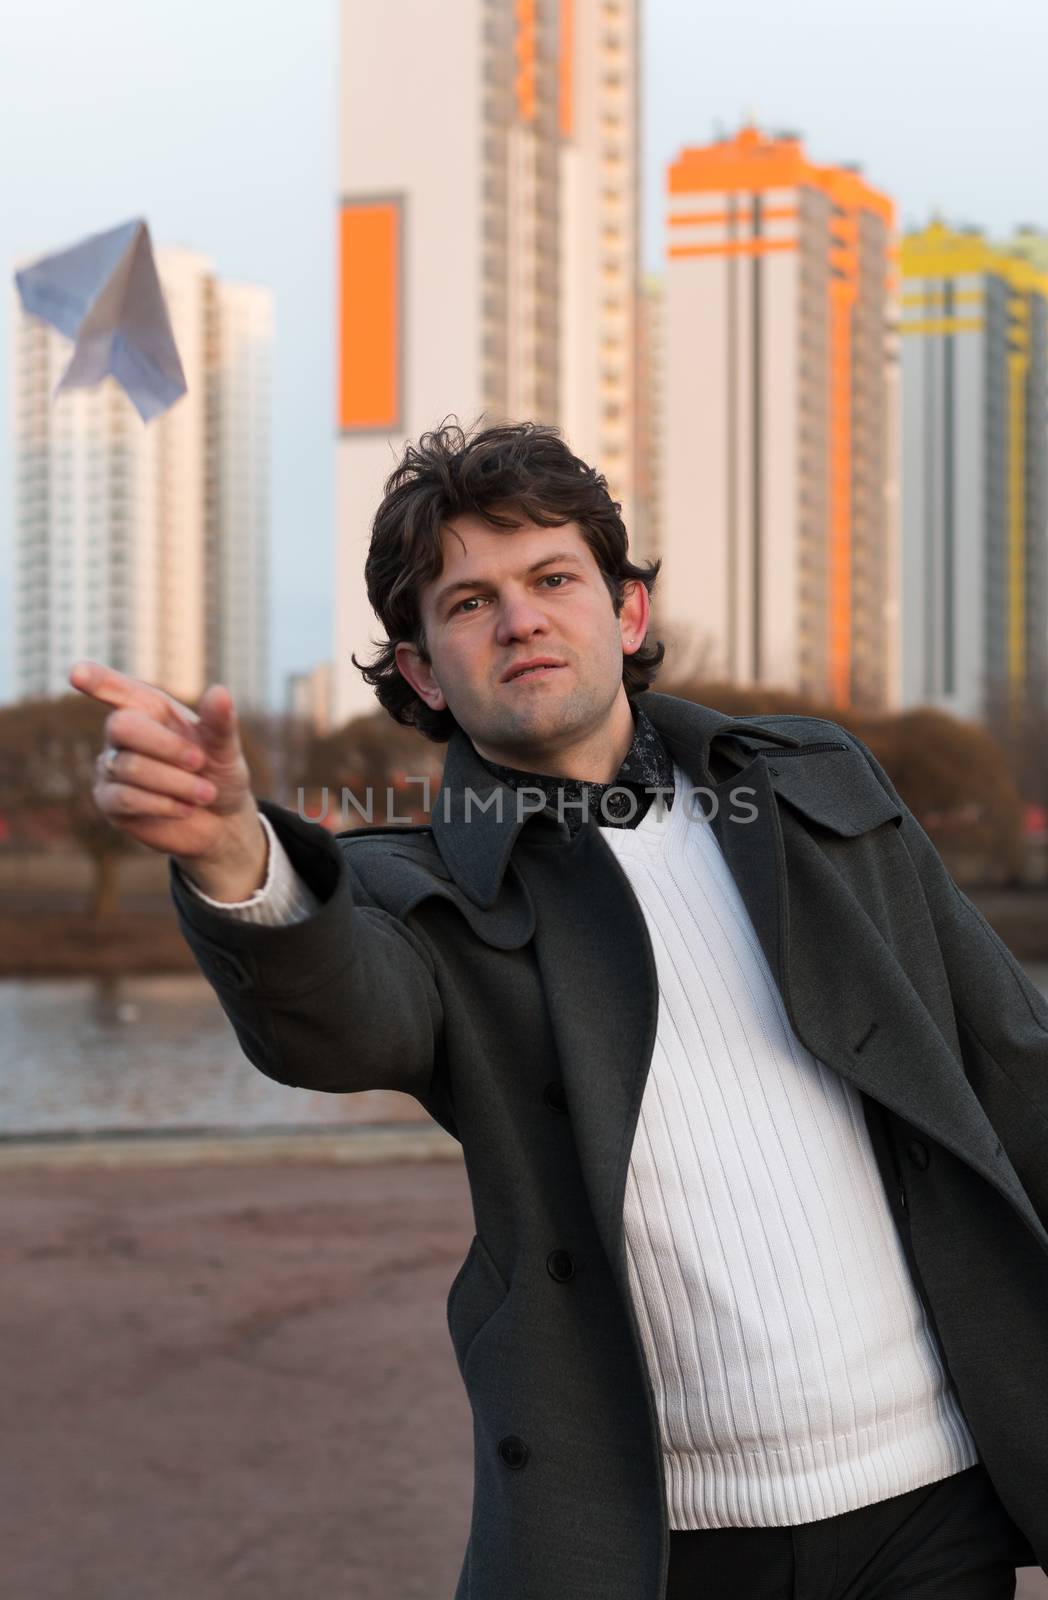 Paper airplane launching in park, free space, Man in grey coat and white sweater holding handmade paper airplane in hand on high-rise building background. Open-air game, rest, leisure, pastime concept by MSharova